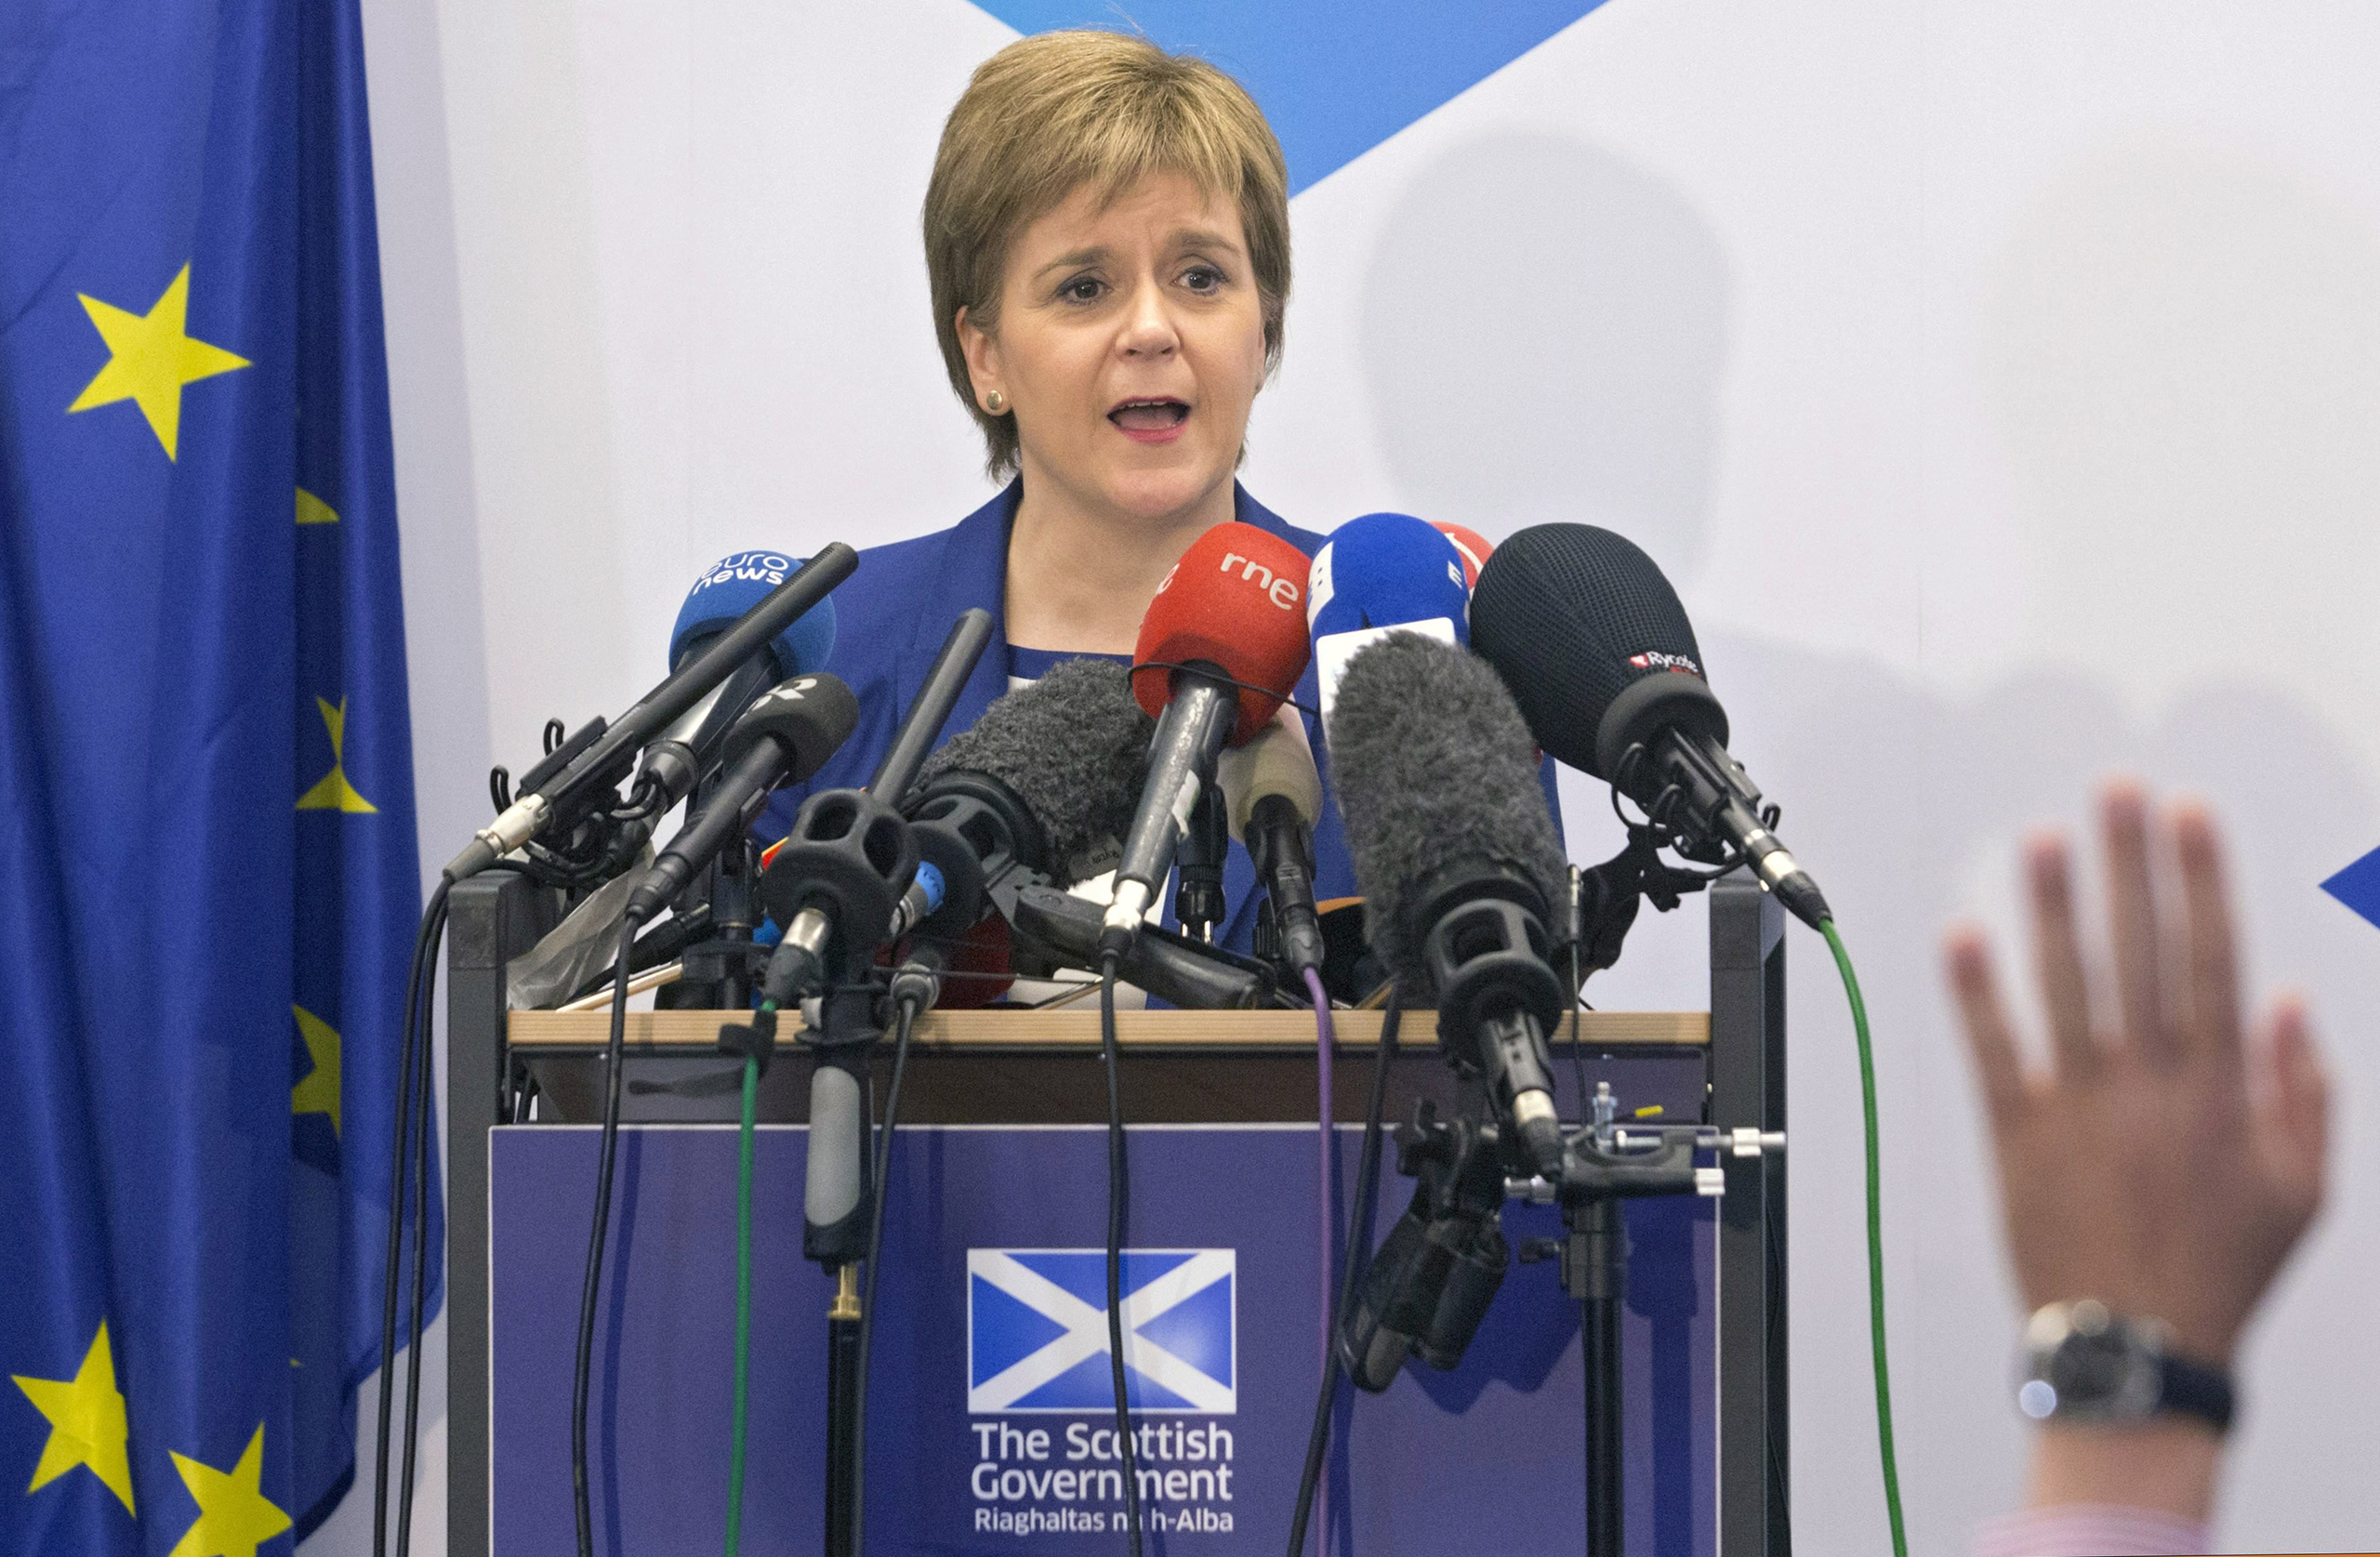 Scotland's First Minister Nicola Sturgeon holds a news conference at the Scotland House on her visit in Brussels, Belgium, June 29, 2016. (Geoffrey Van Der Hassel—POOL/EPA)